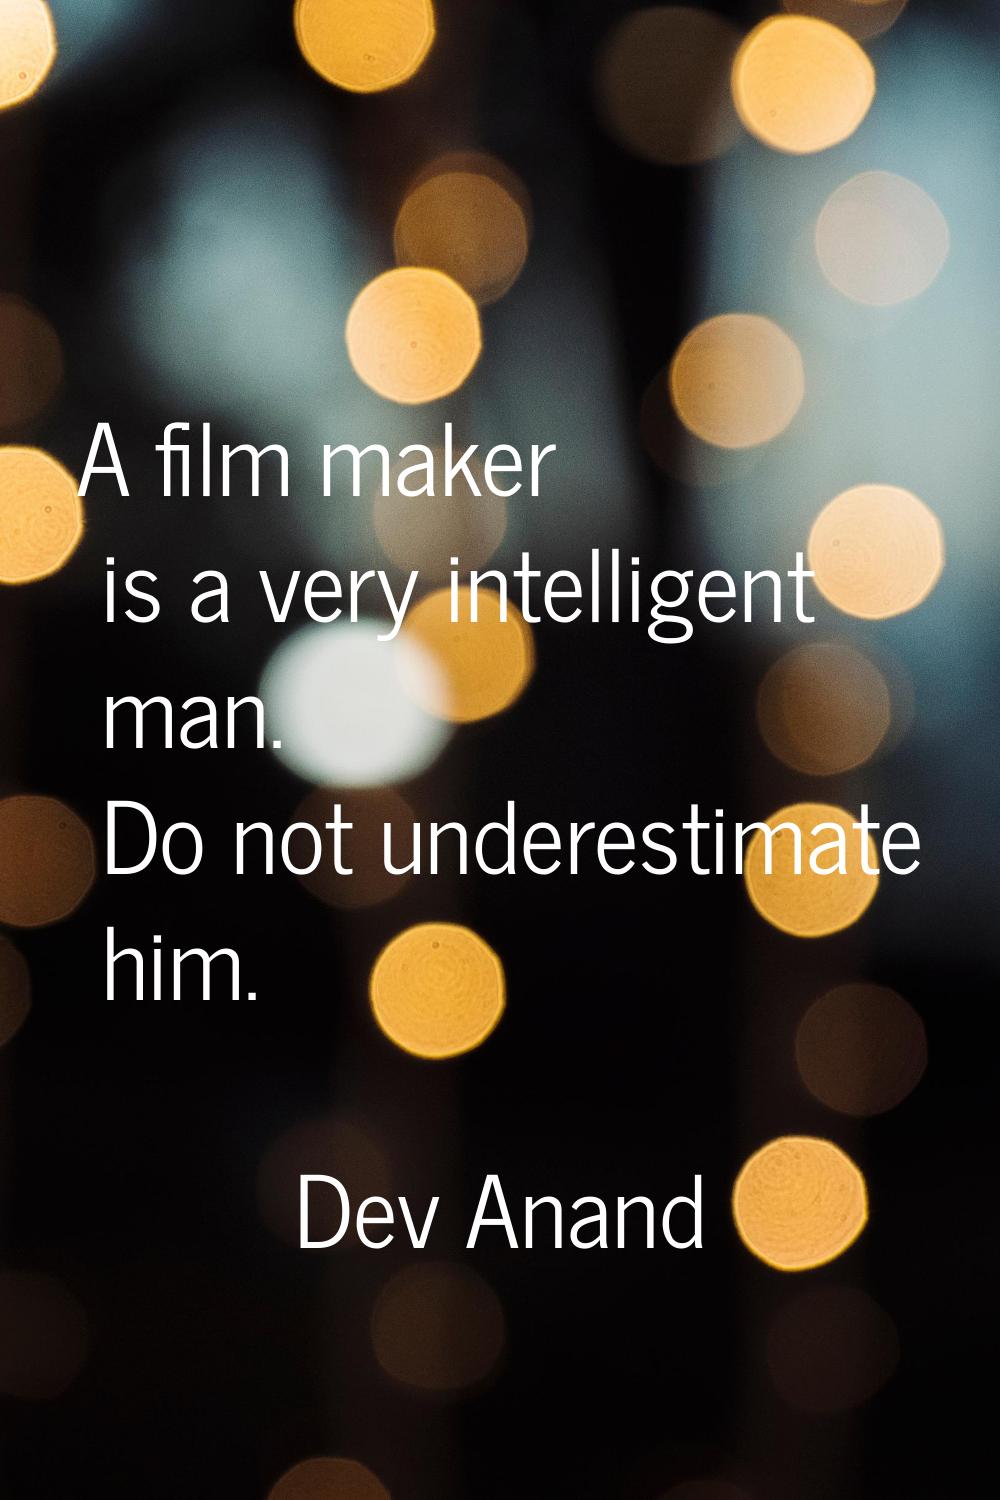 A film maker is a very intelligent man. Do not underestimate him.